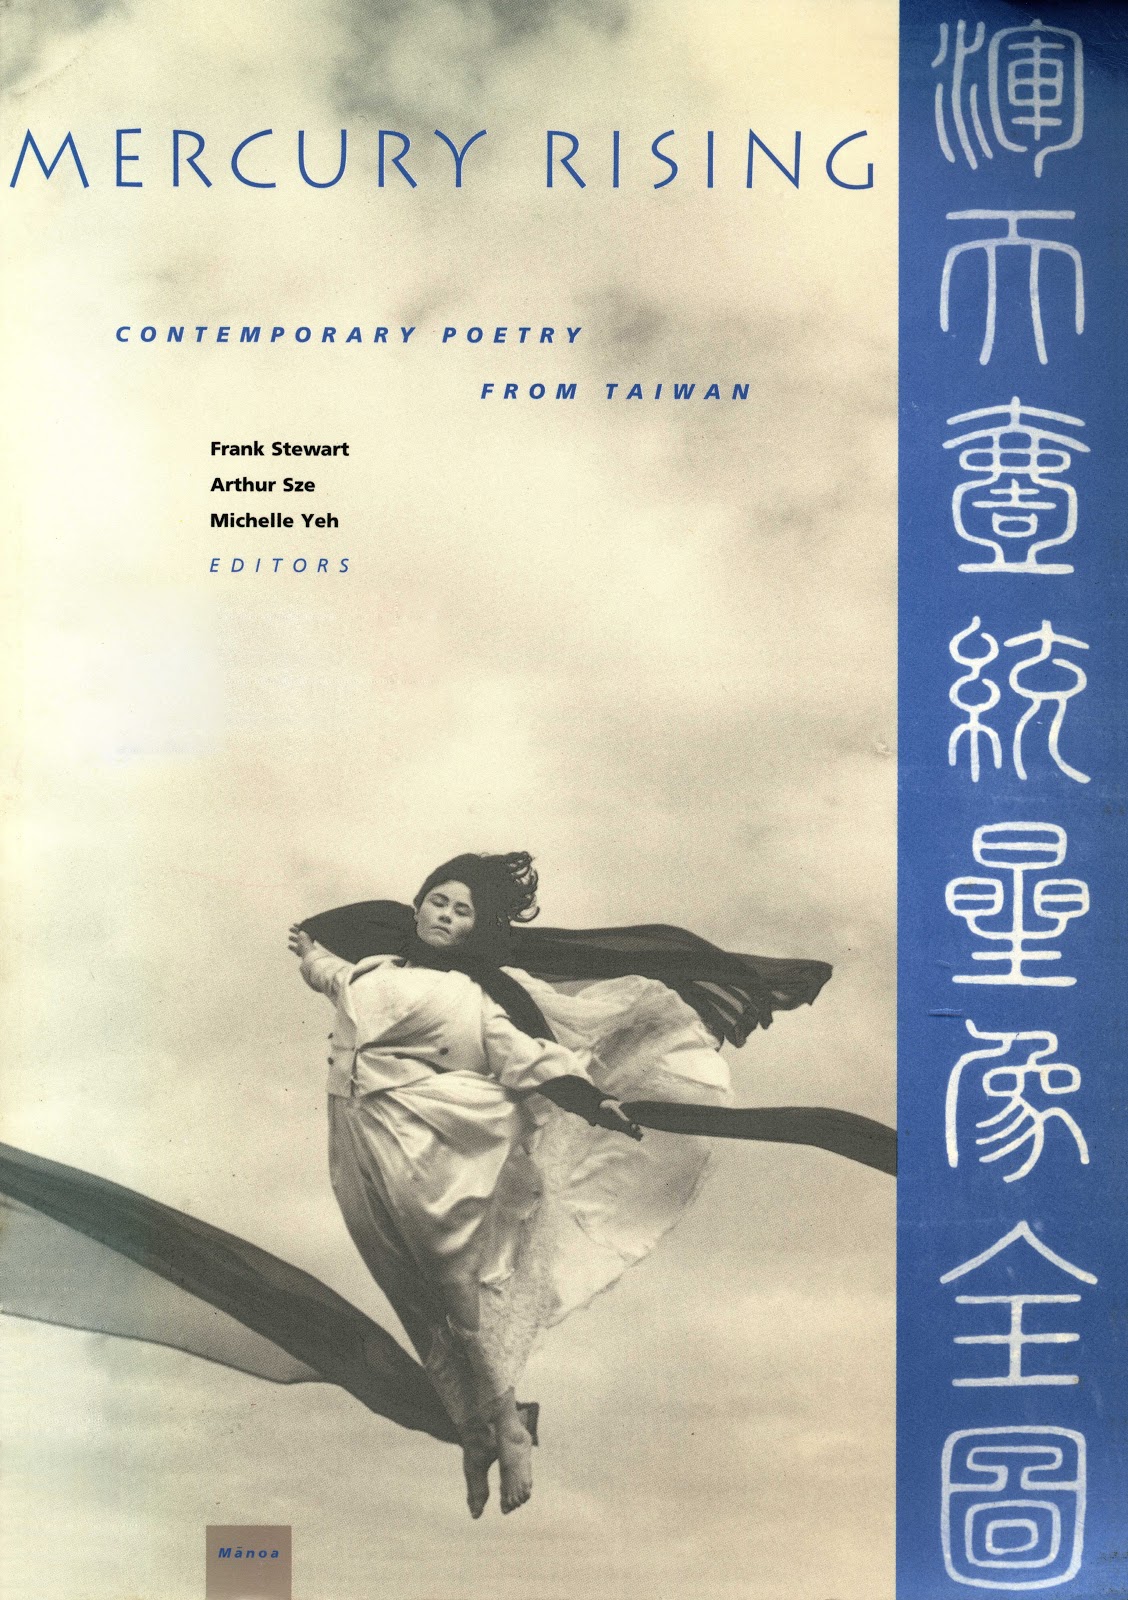 Mercury Rising: Featuring Contemporary Poetry from Taiwan 